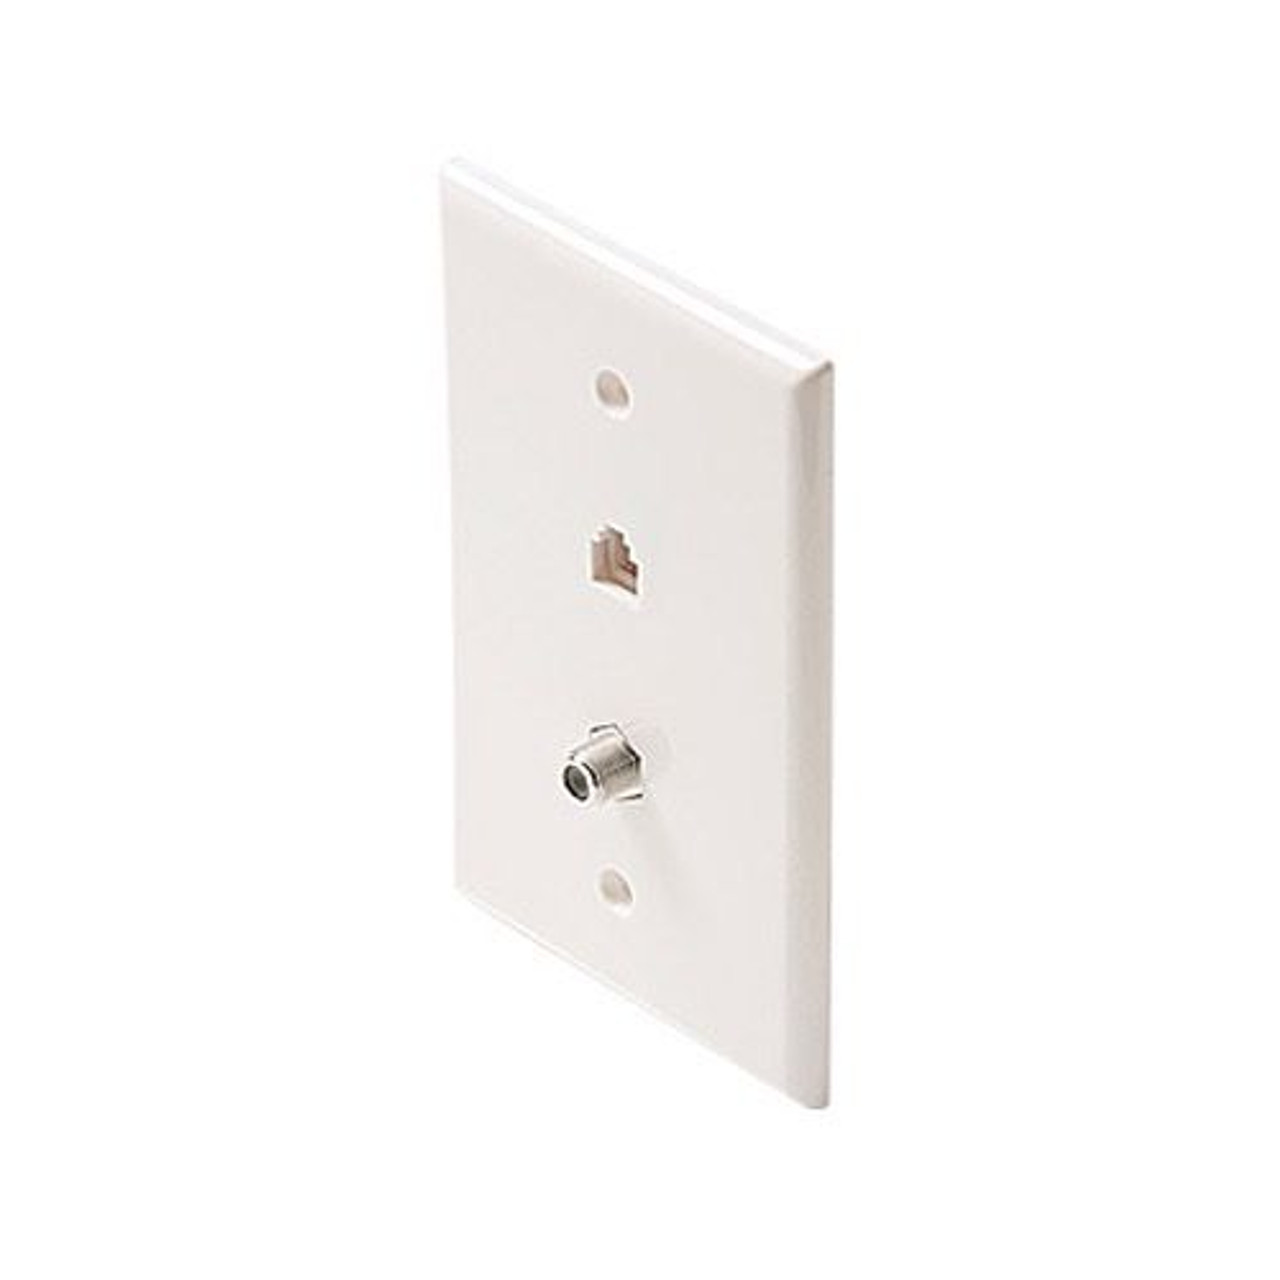 Steren 300-234WH RJ11 Phone F-Connector Wall Plate White Combo RJ-11 Modular Data Line Audio Signal Video 75 Ohm Coaxial Cable Plug